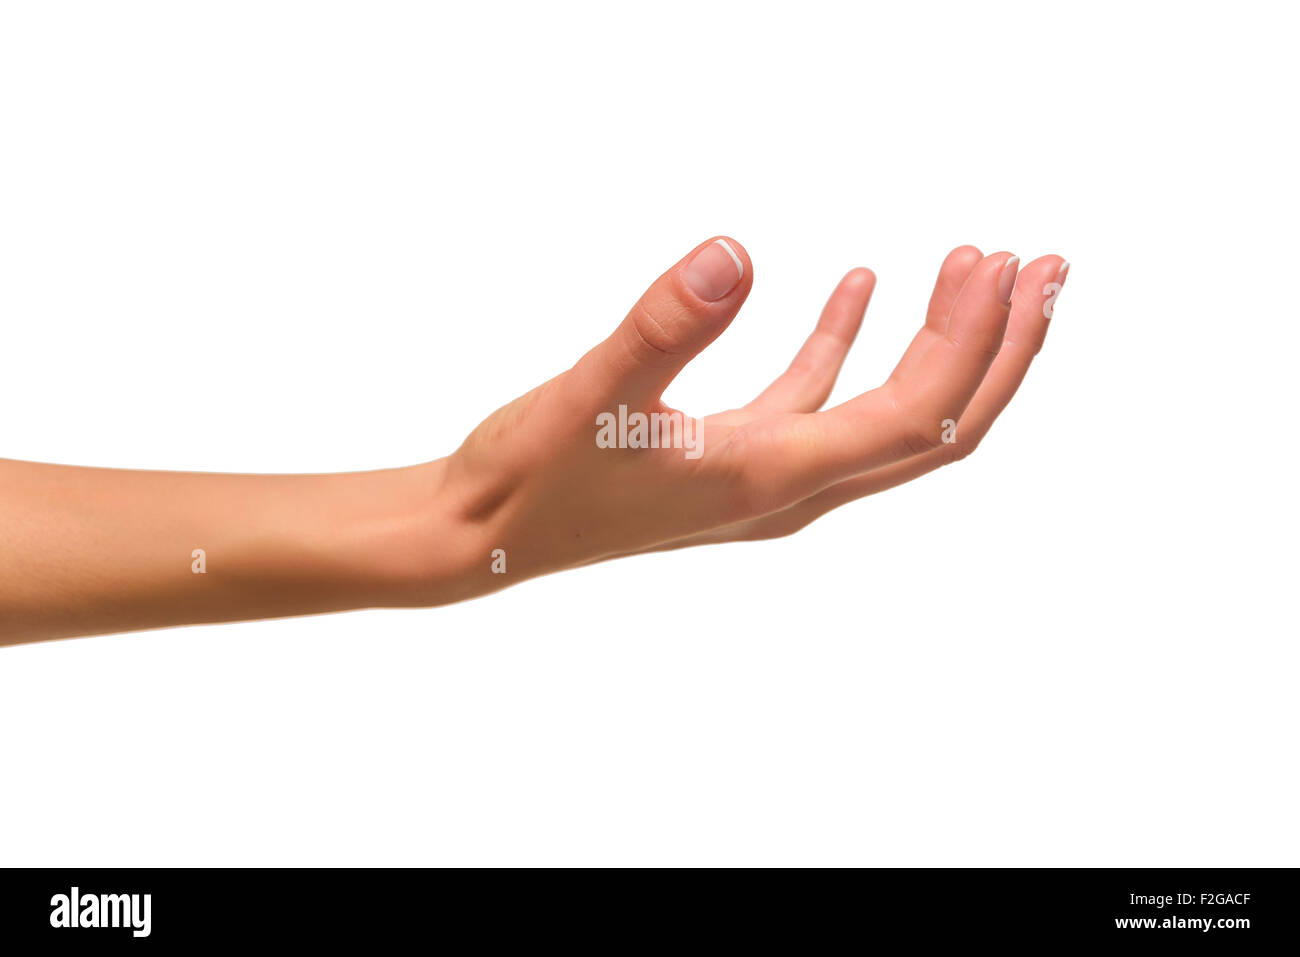 Open a woman's hand, palm up. Stock Photo